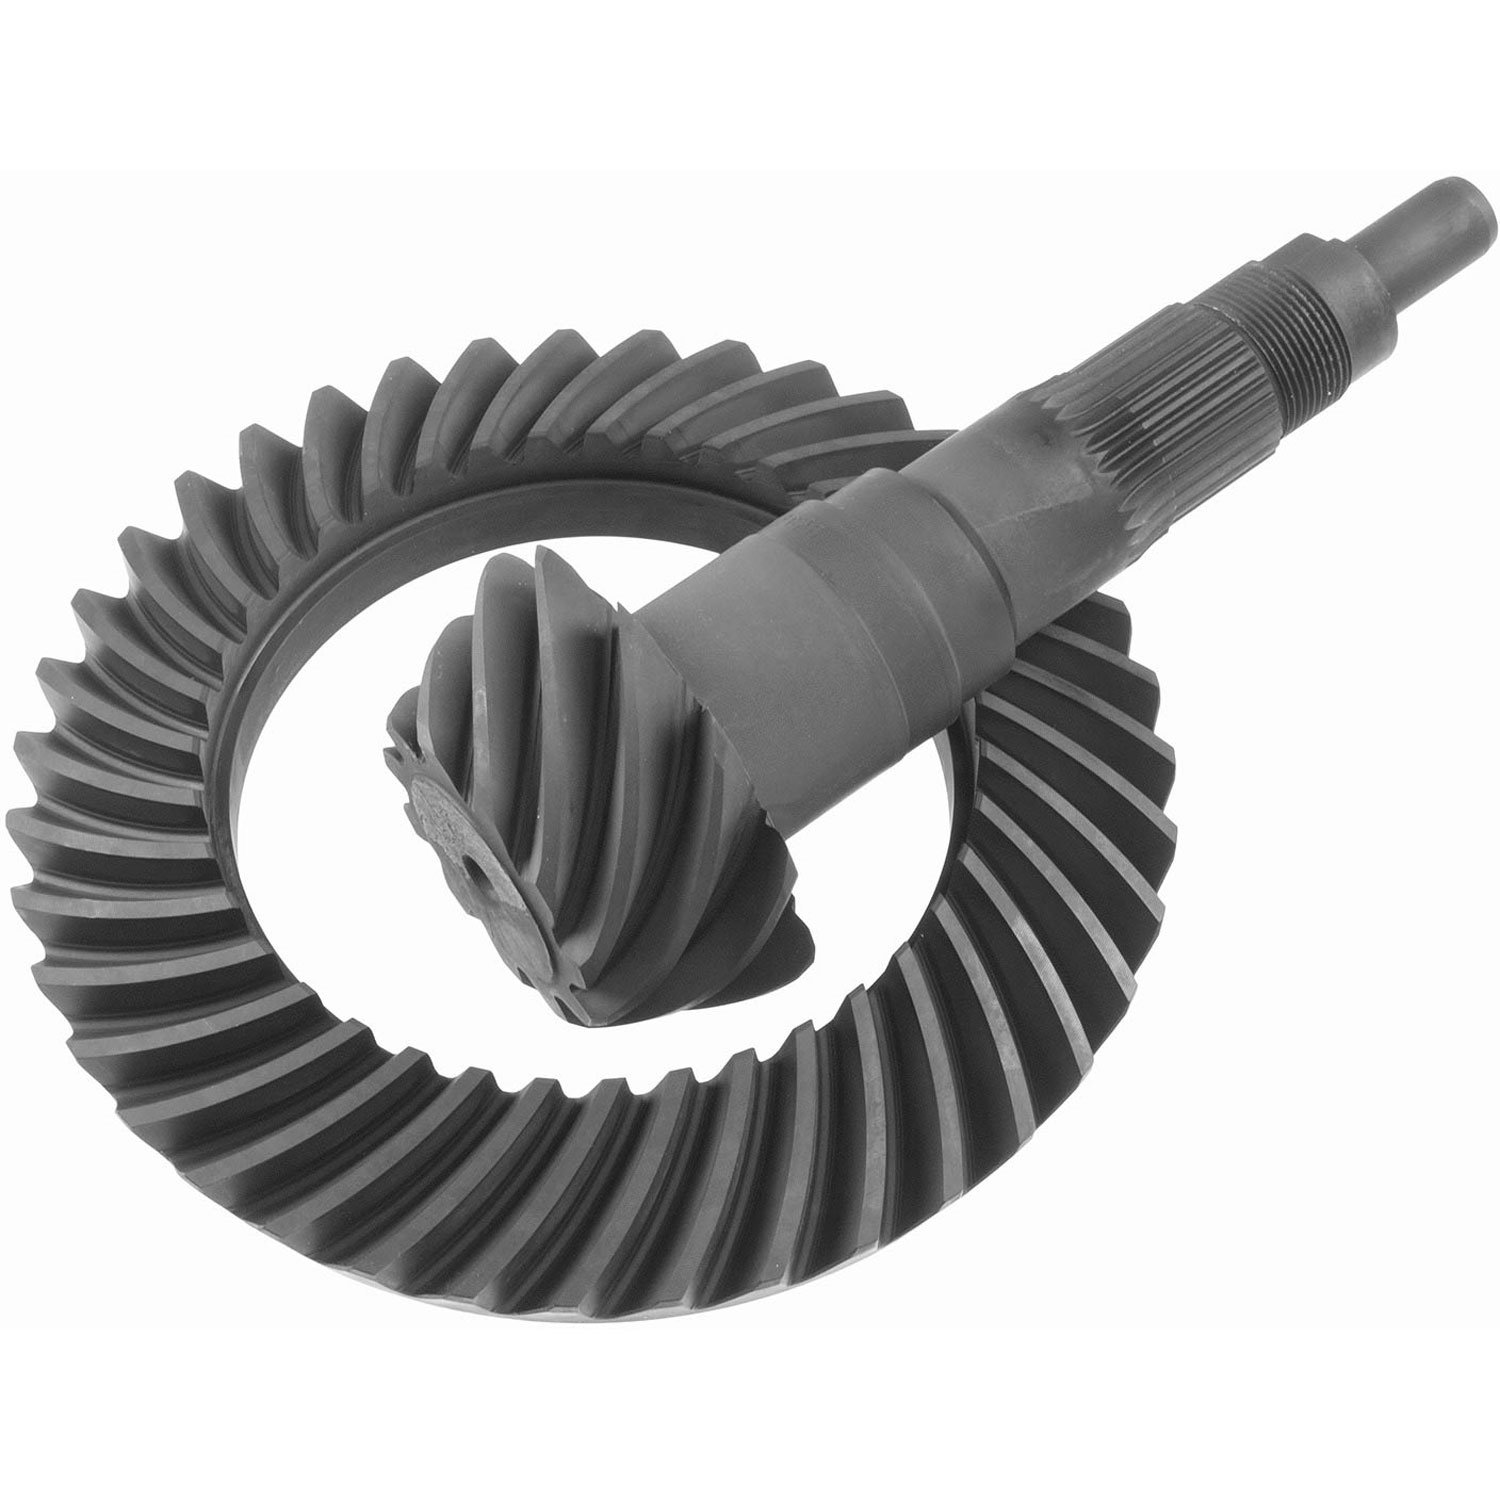 Street Gear Ring And Pinion Set